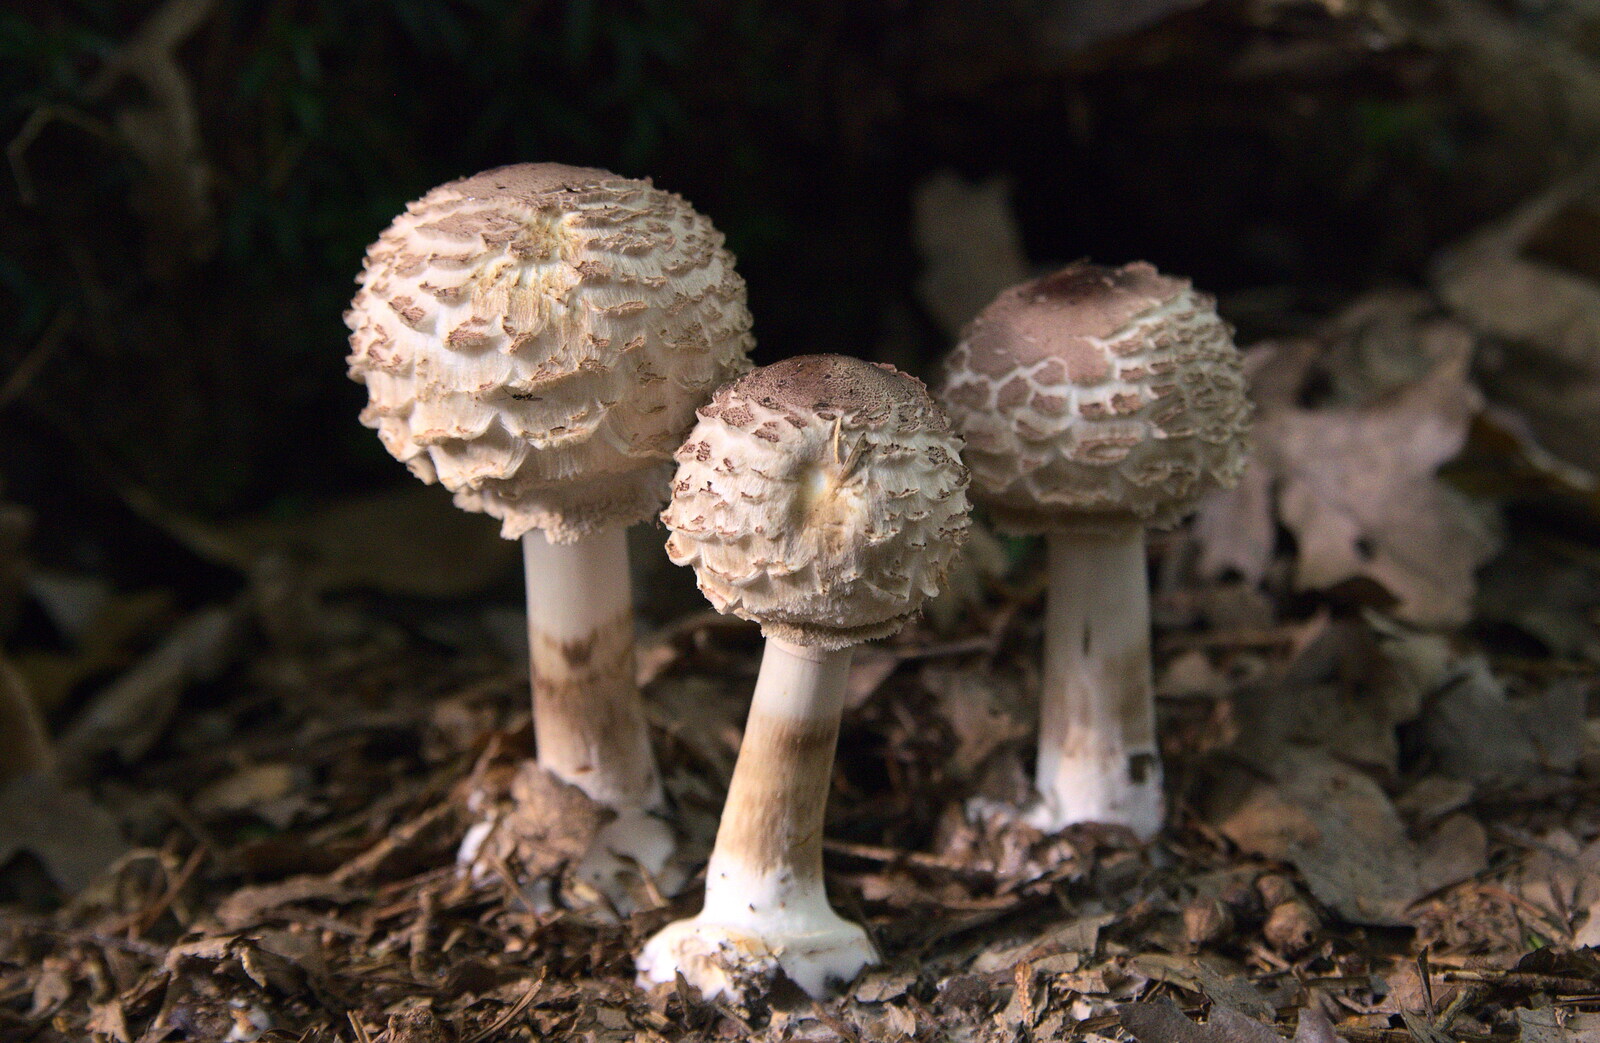 Mushrooms with shaggy tops from The Mushrooms of Thornham Estate, Thornham, Suffolk - 4th October 2015